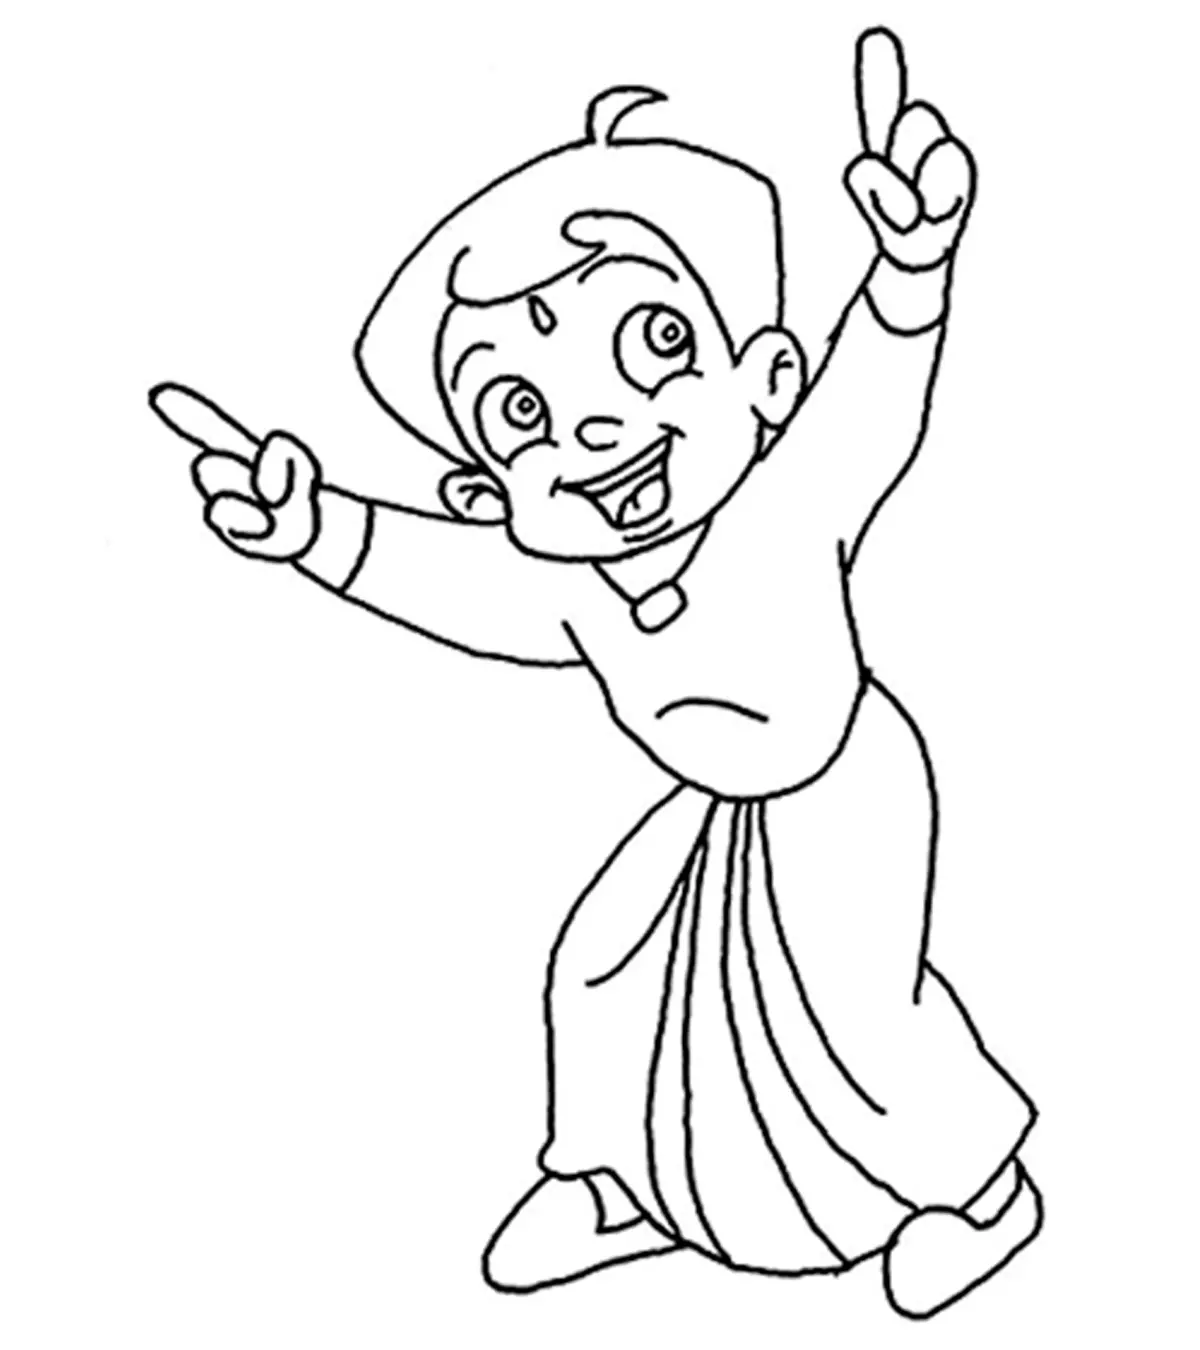 25 Cute Chota Bheem Coloring Pages Your Toddler Will Love